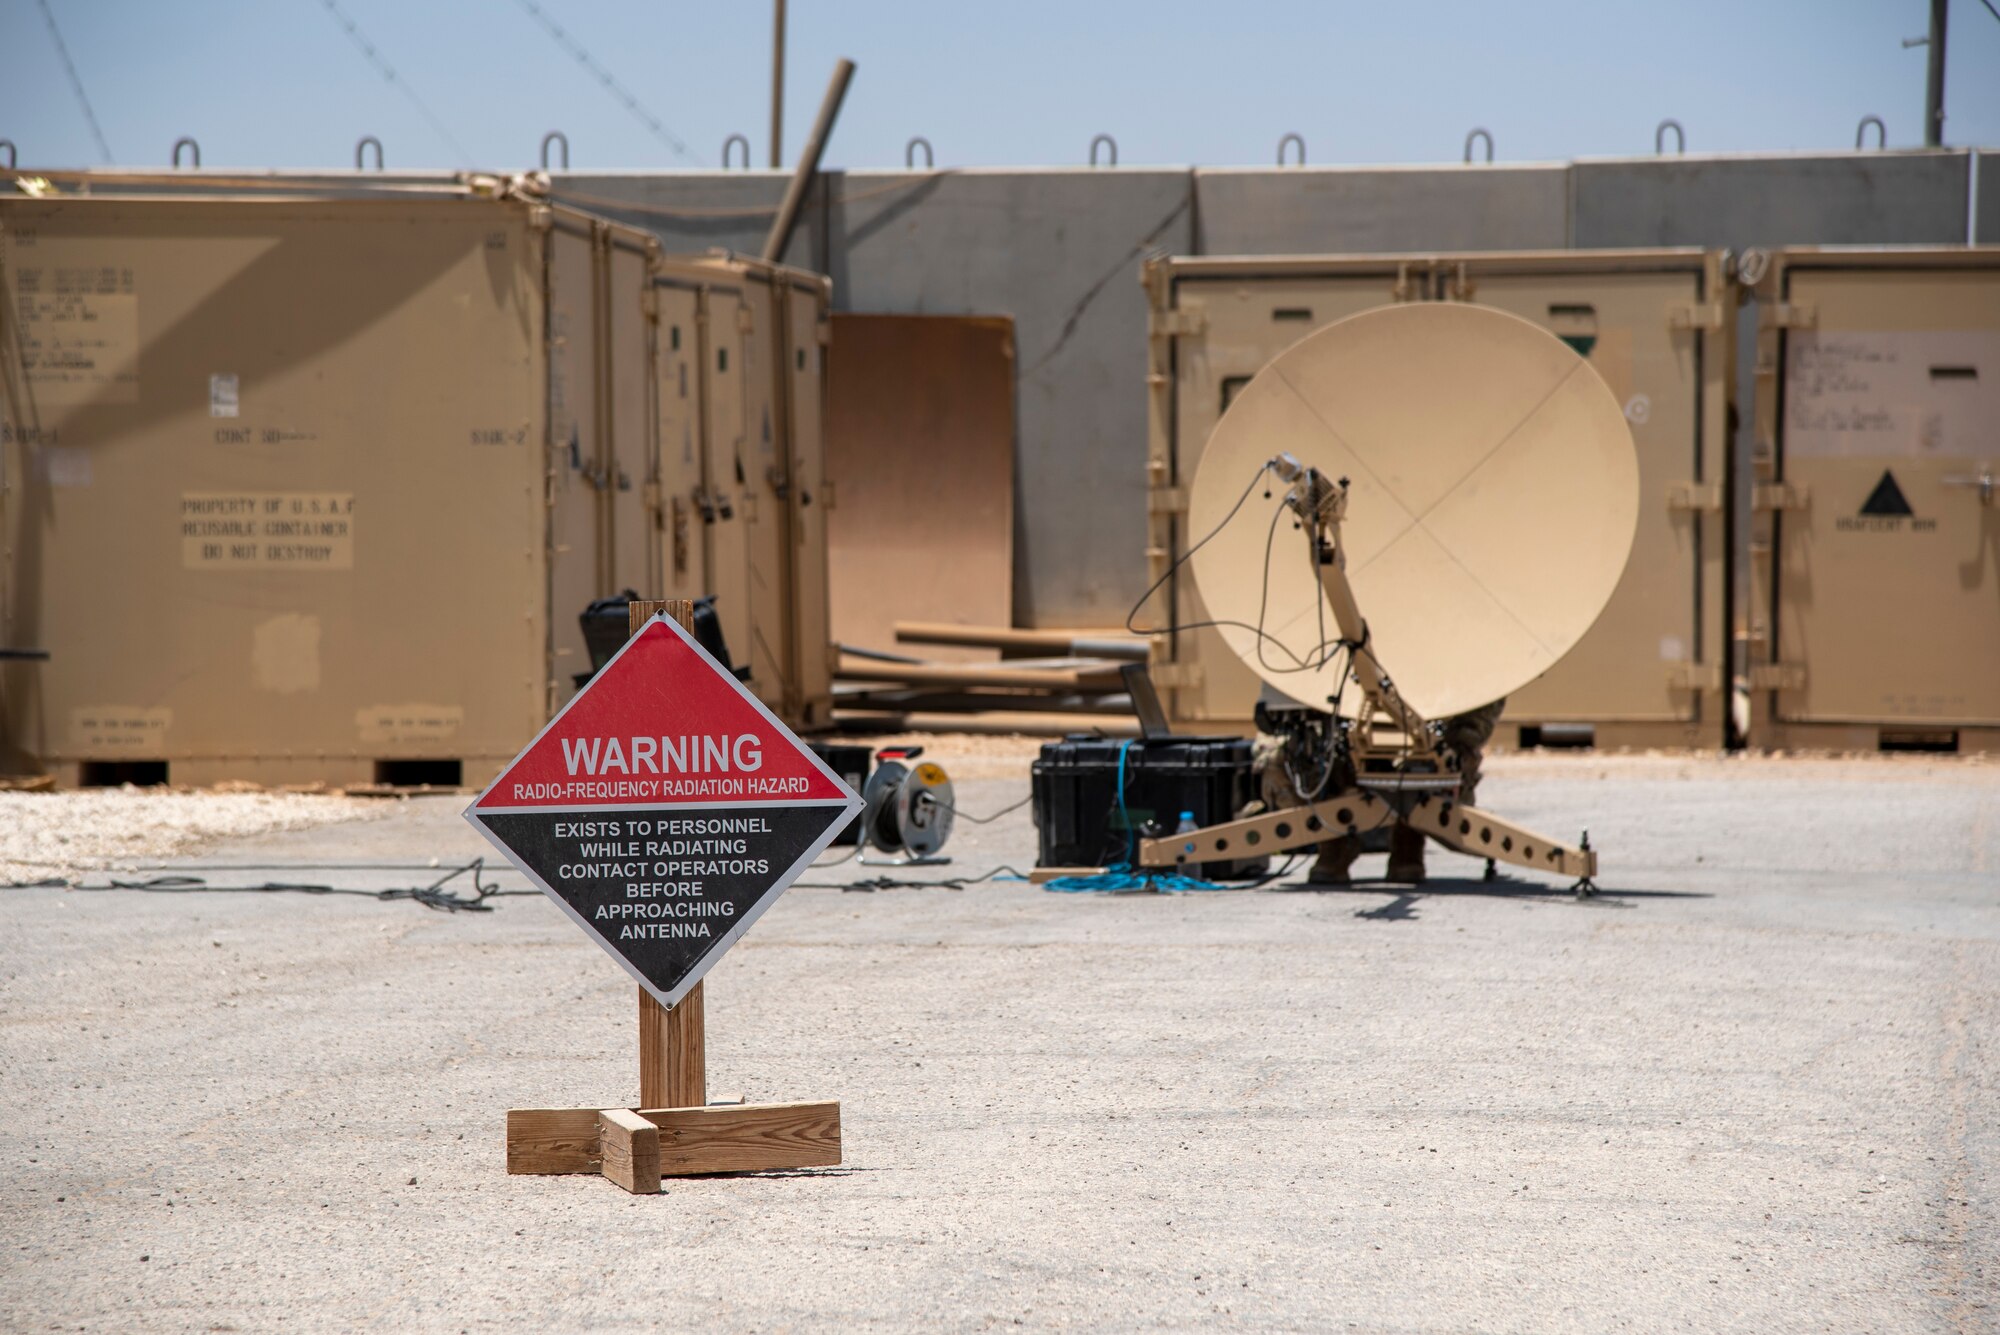 A sign and cordon warn onlookers to stay back from a Communications Fly Away Kit at an undisclosed location, July 20, 2022. The CFK enables the 332d Air Expeditionary Squadron to operate in remote locations by establishing secure communications via satellite. The front of the dish emits high levels of radio frequency radiation. (U.S. Air Force photo by: Tech. Sgt. Jim Bentley)